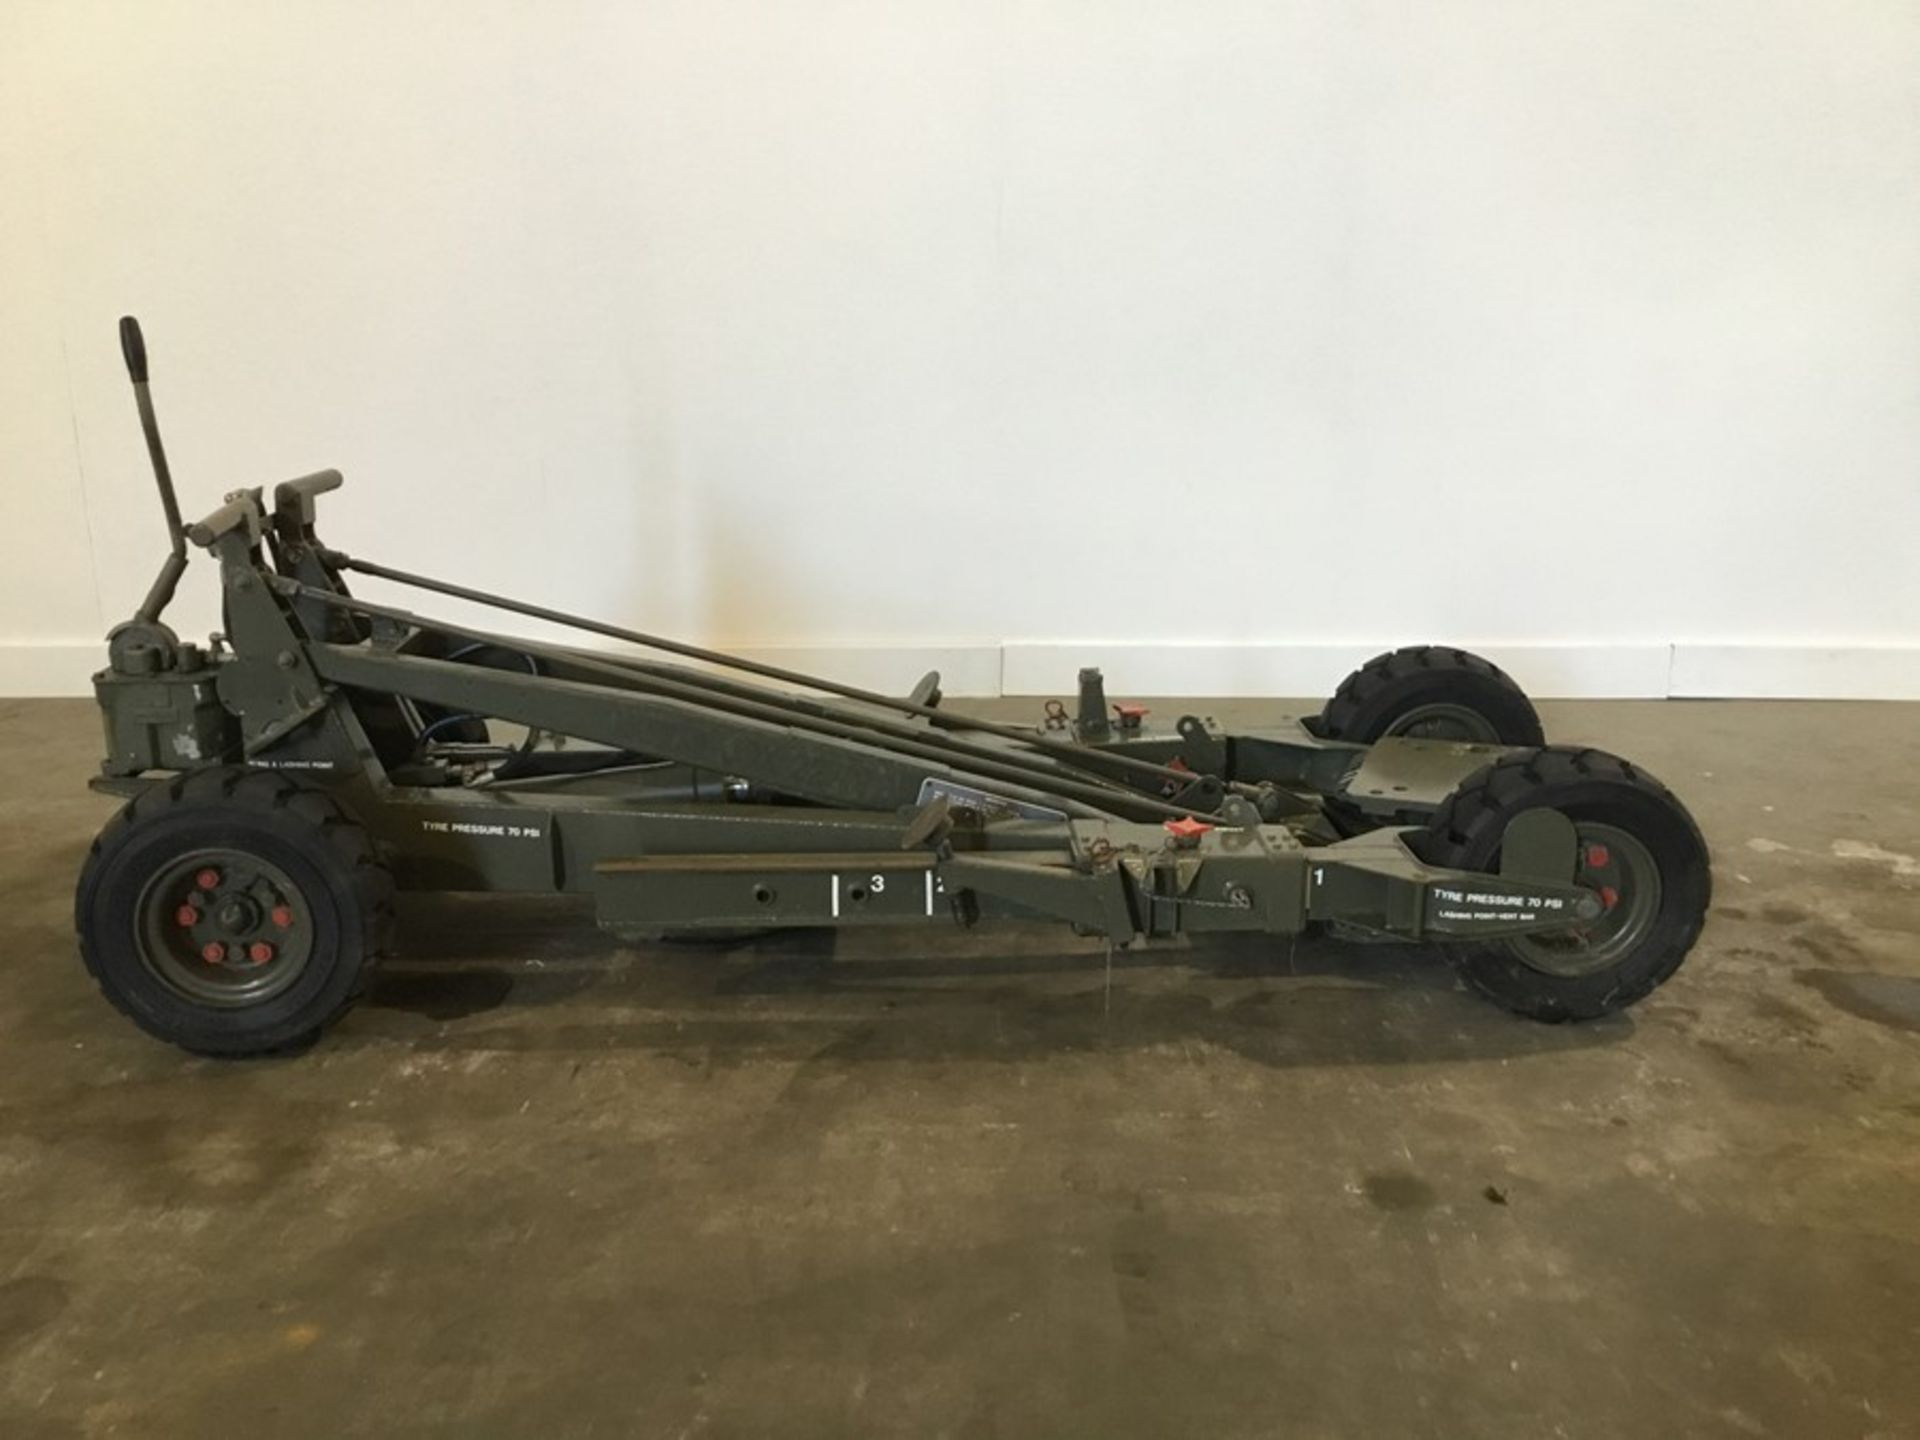 Portsmouth Aviation Type R Mk2 weapon loading trolley, SWL 1135Kg,Max lift height 2.2Metres - Image 13 of 15